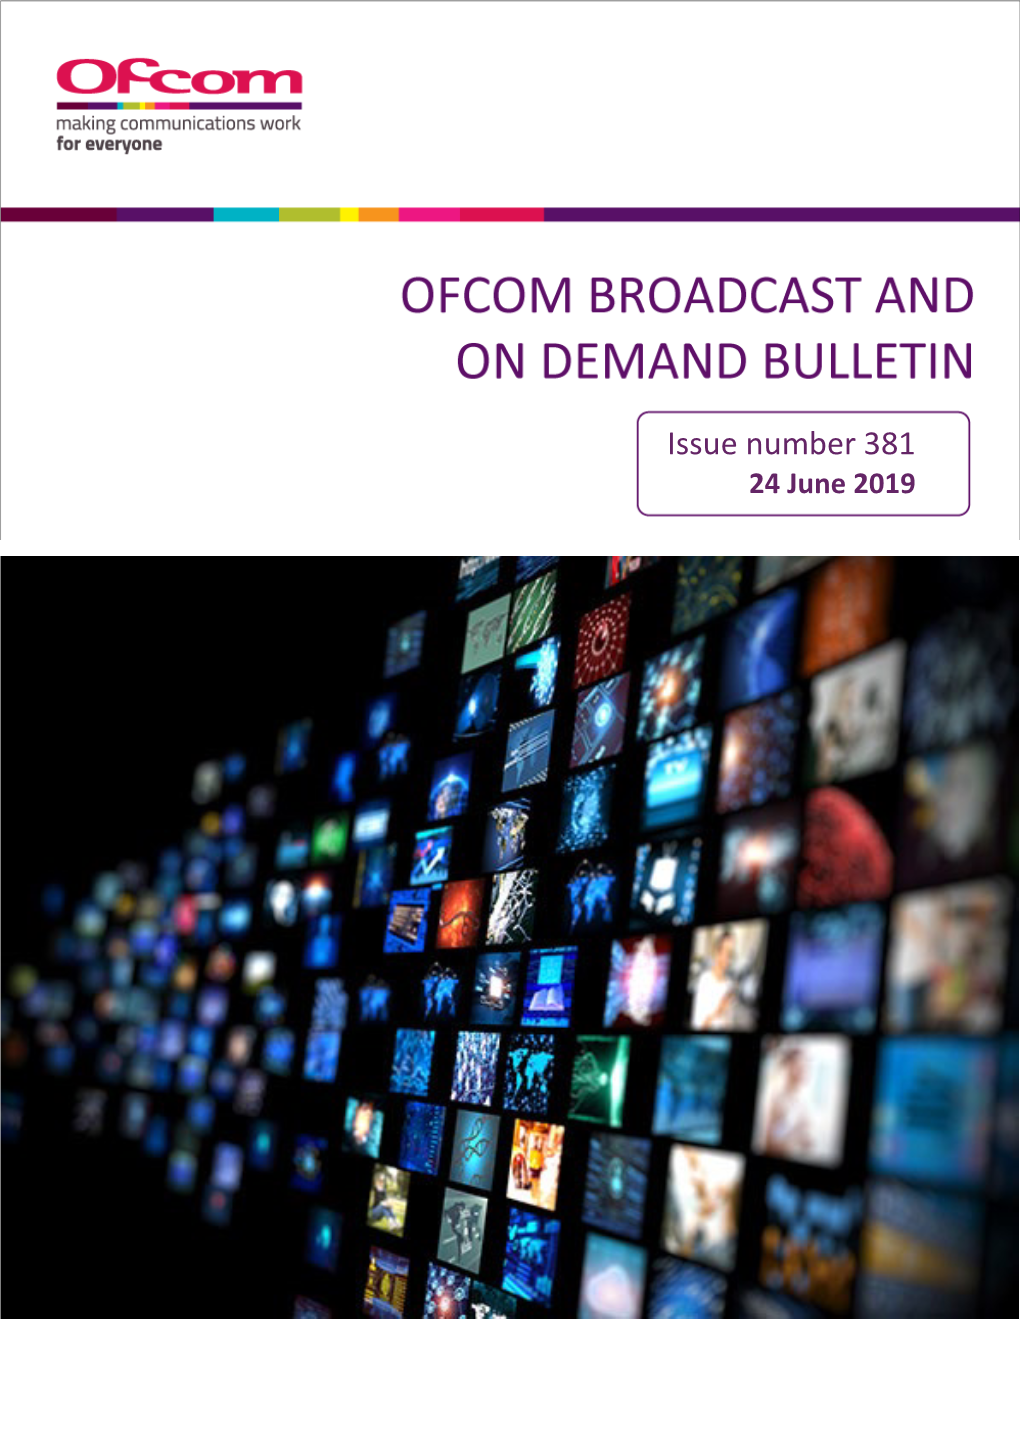 Issue 381 of Ofcom's Broadcast and on Demand Bulletin